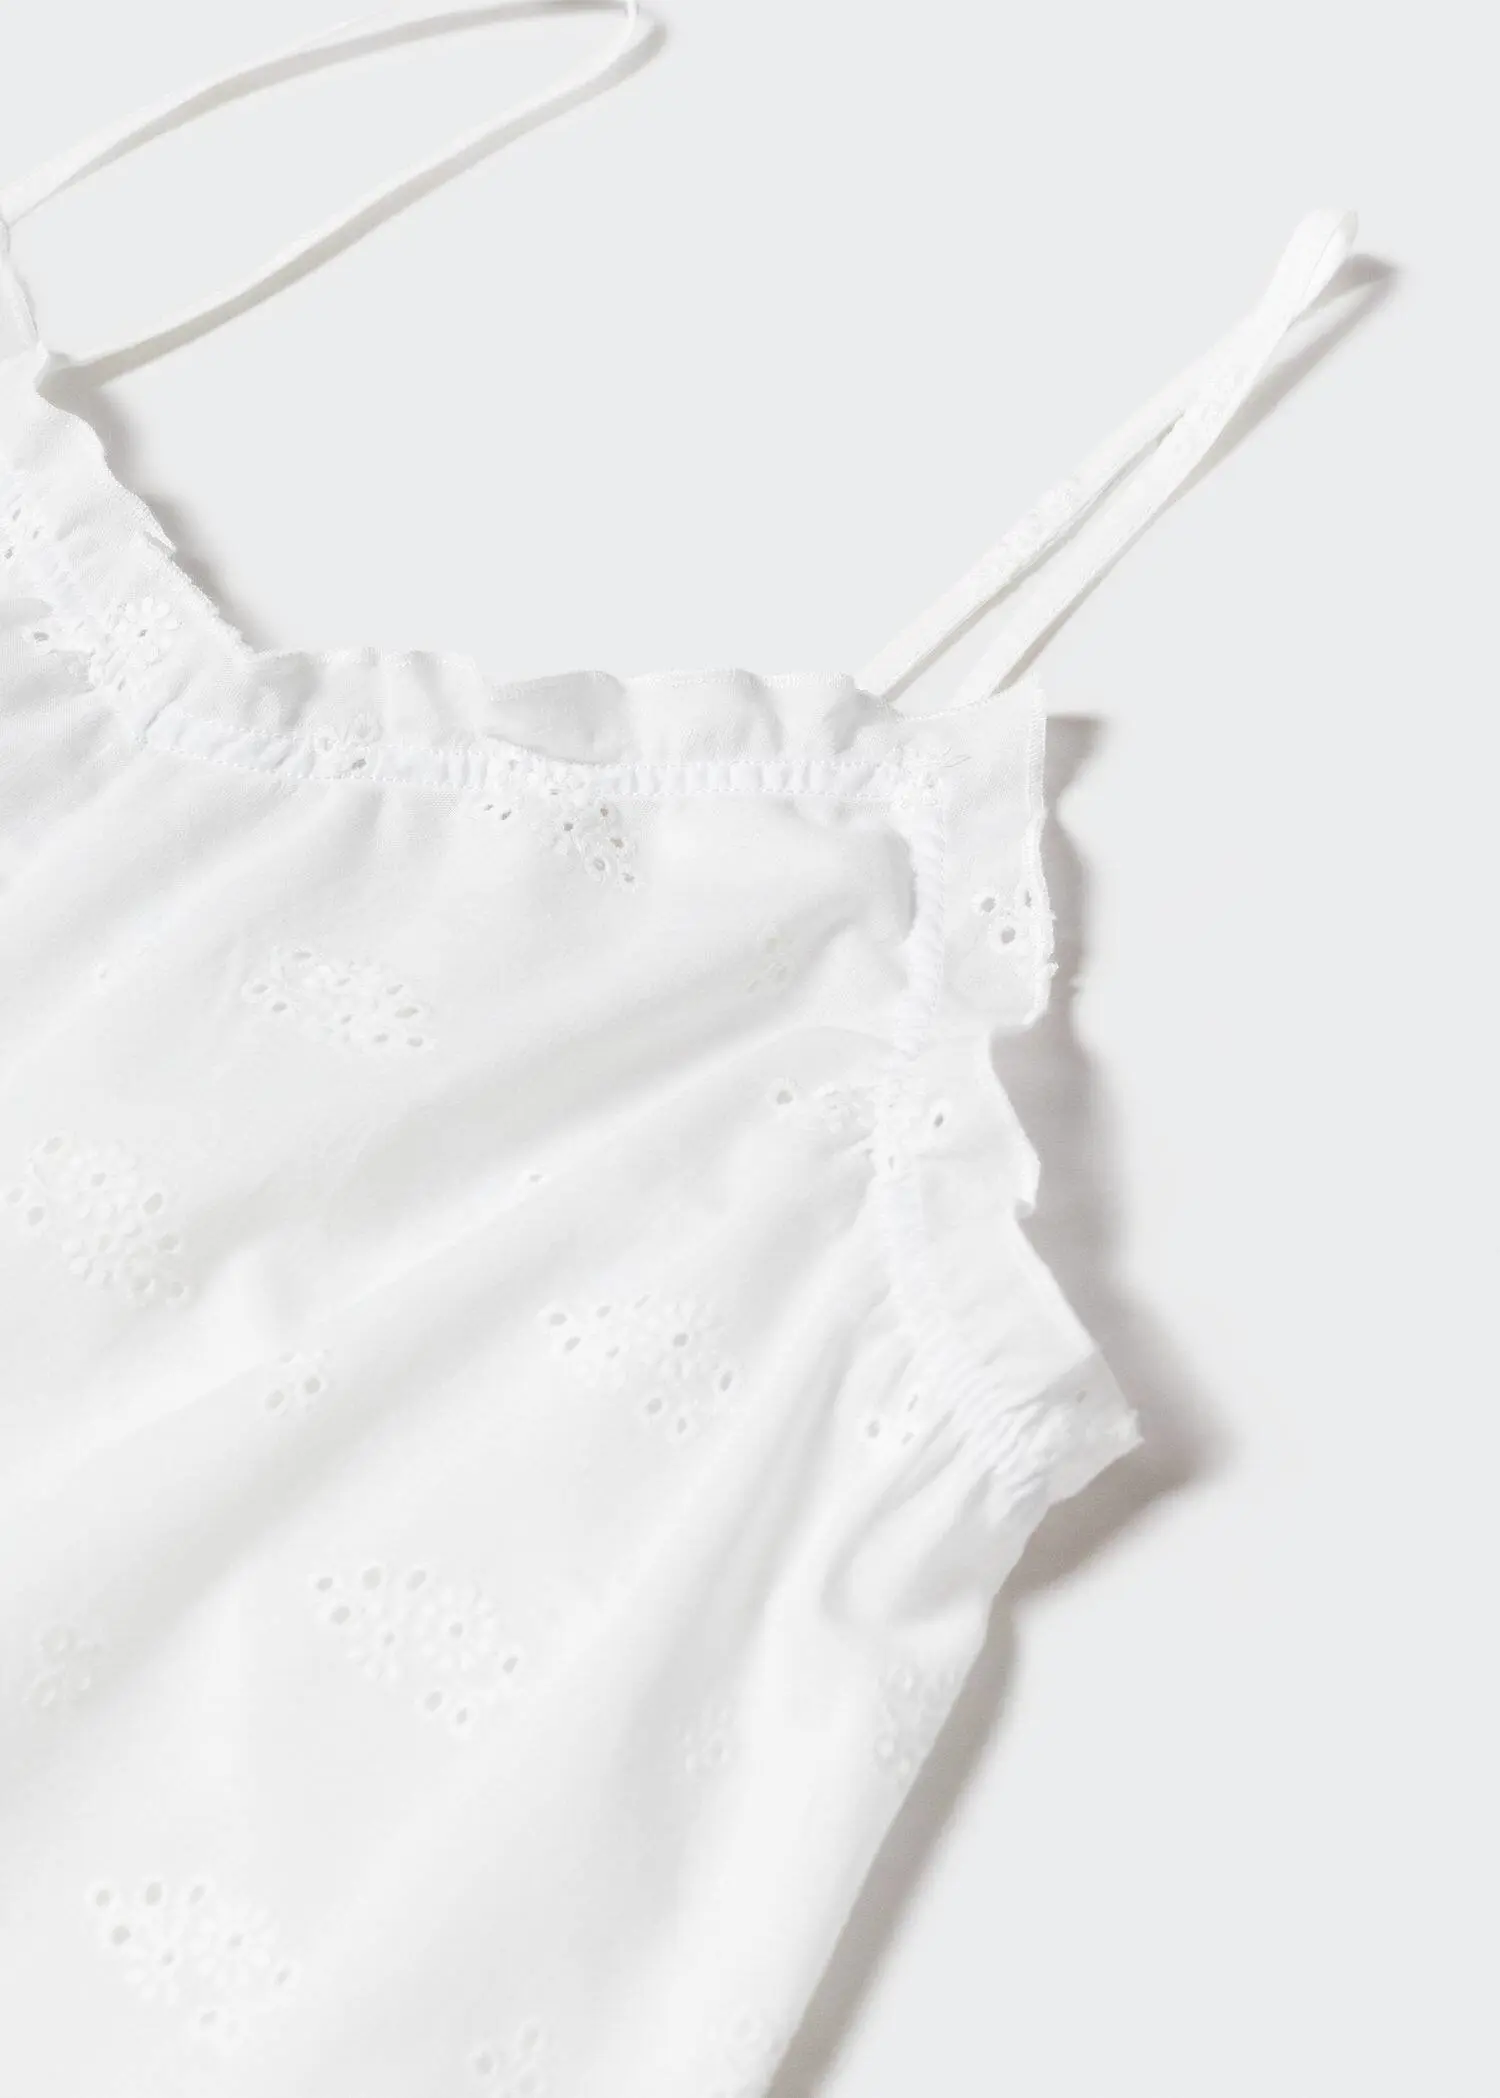 Mango Floral embroidered nightgown. a close-up view of the shoulder straps of a white dress. 